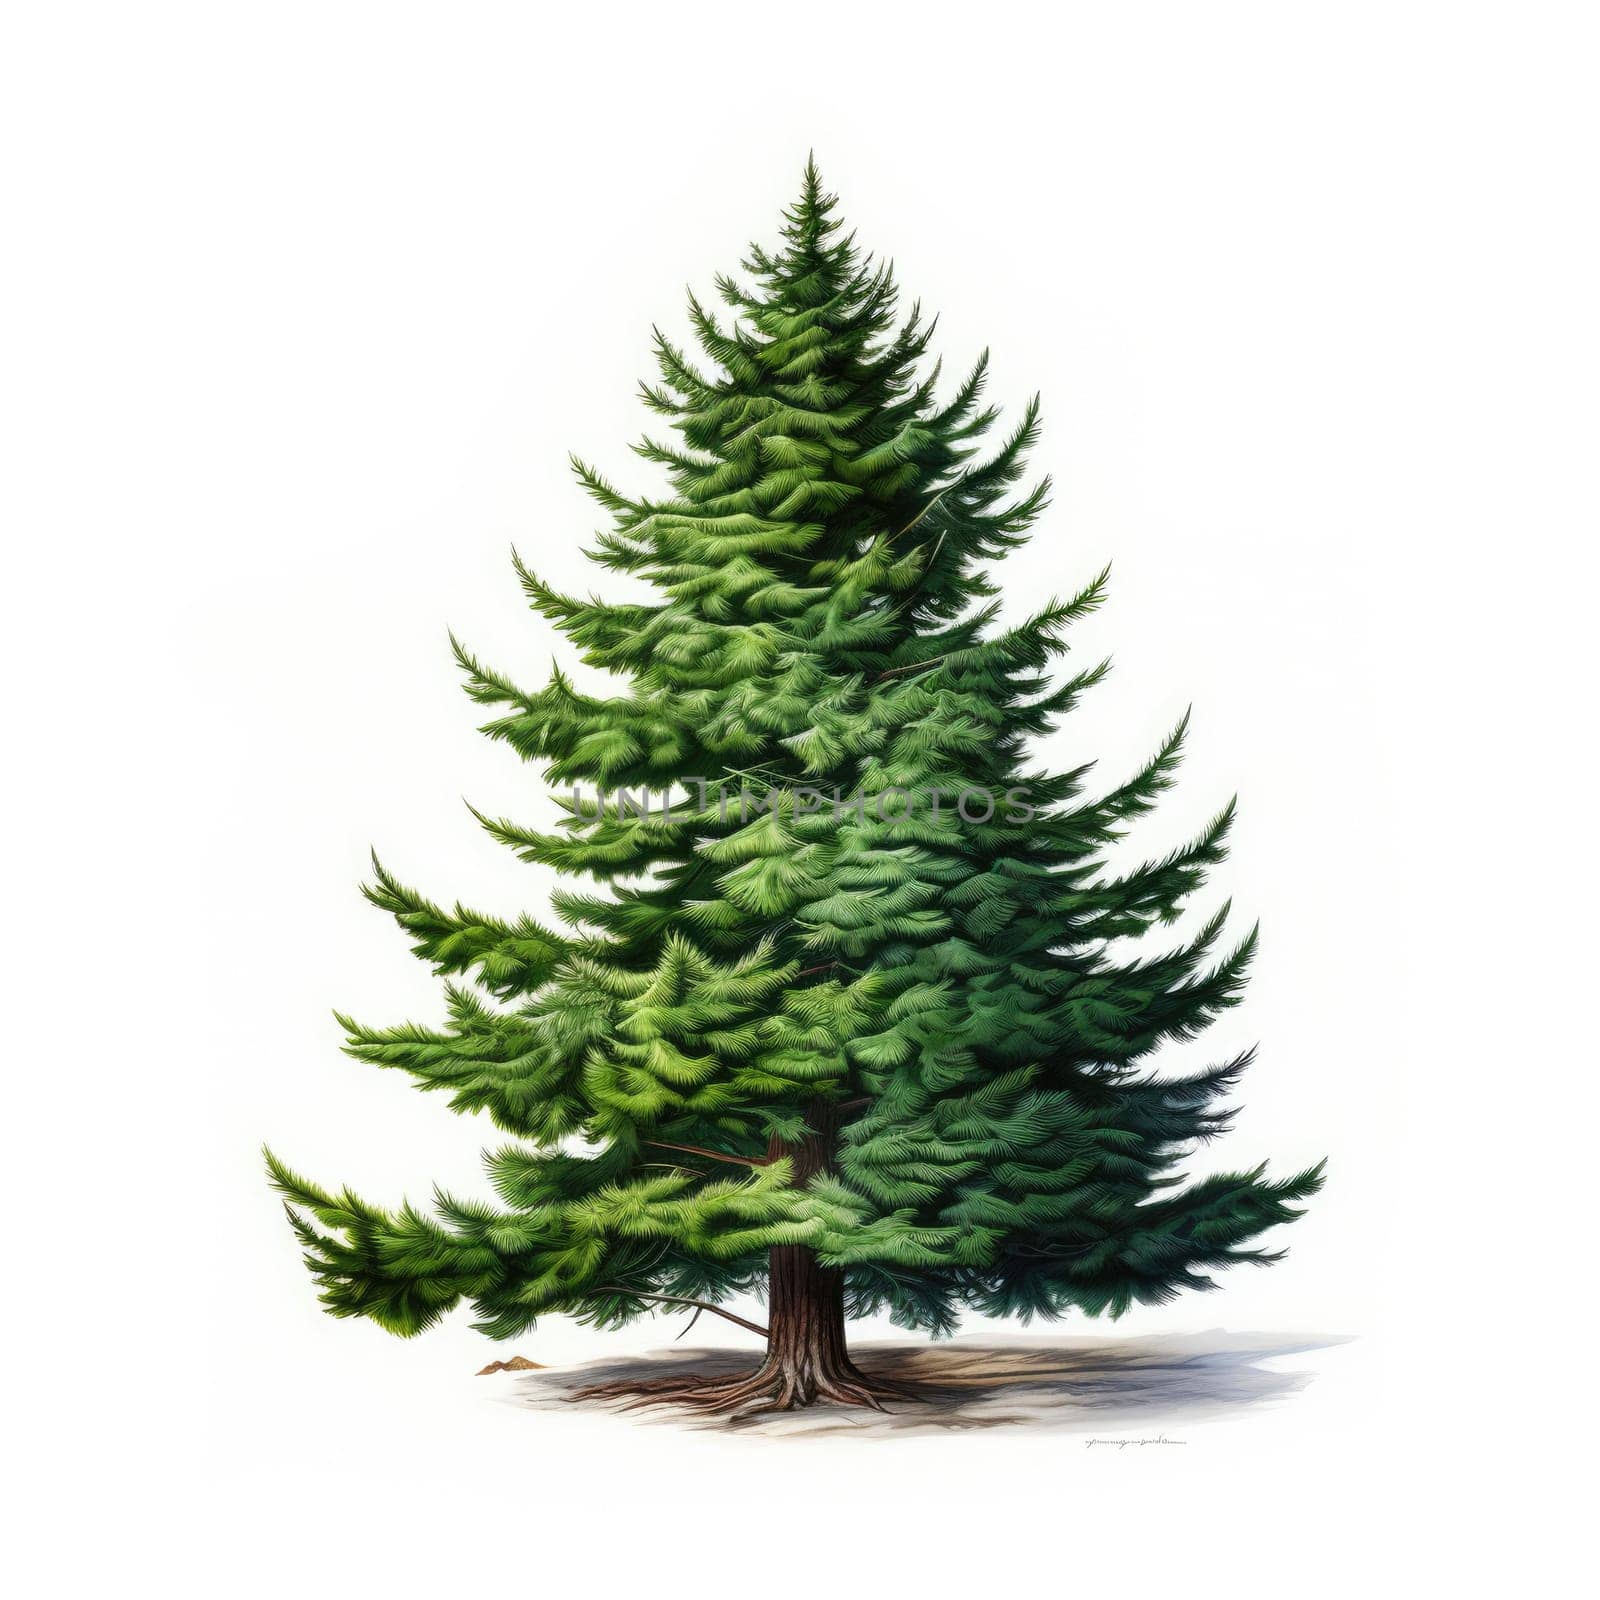 Cutout pine tree. Fir isolated on white background. High quality clipping mask for professional composition. Evergreen tree.